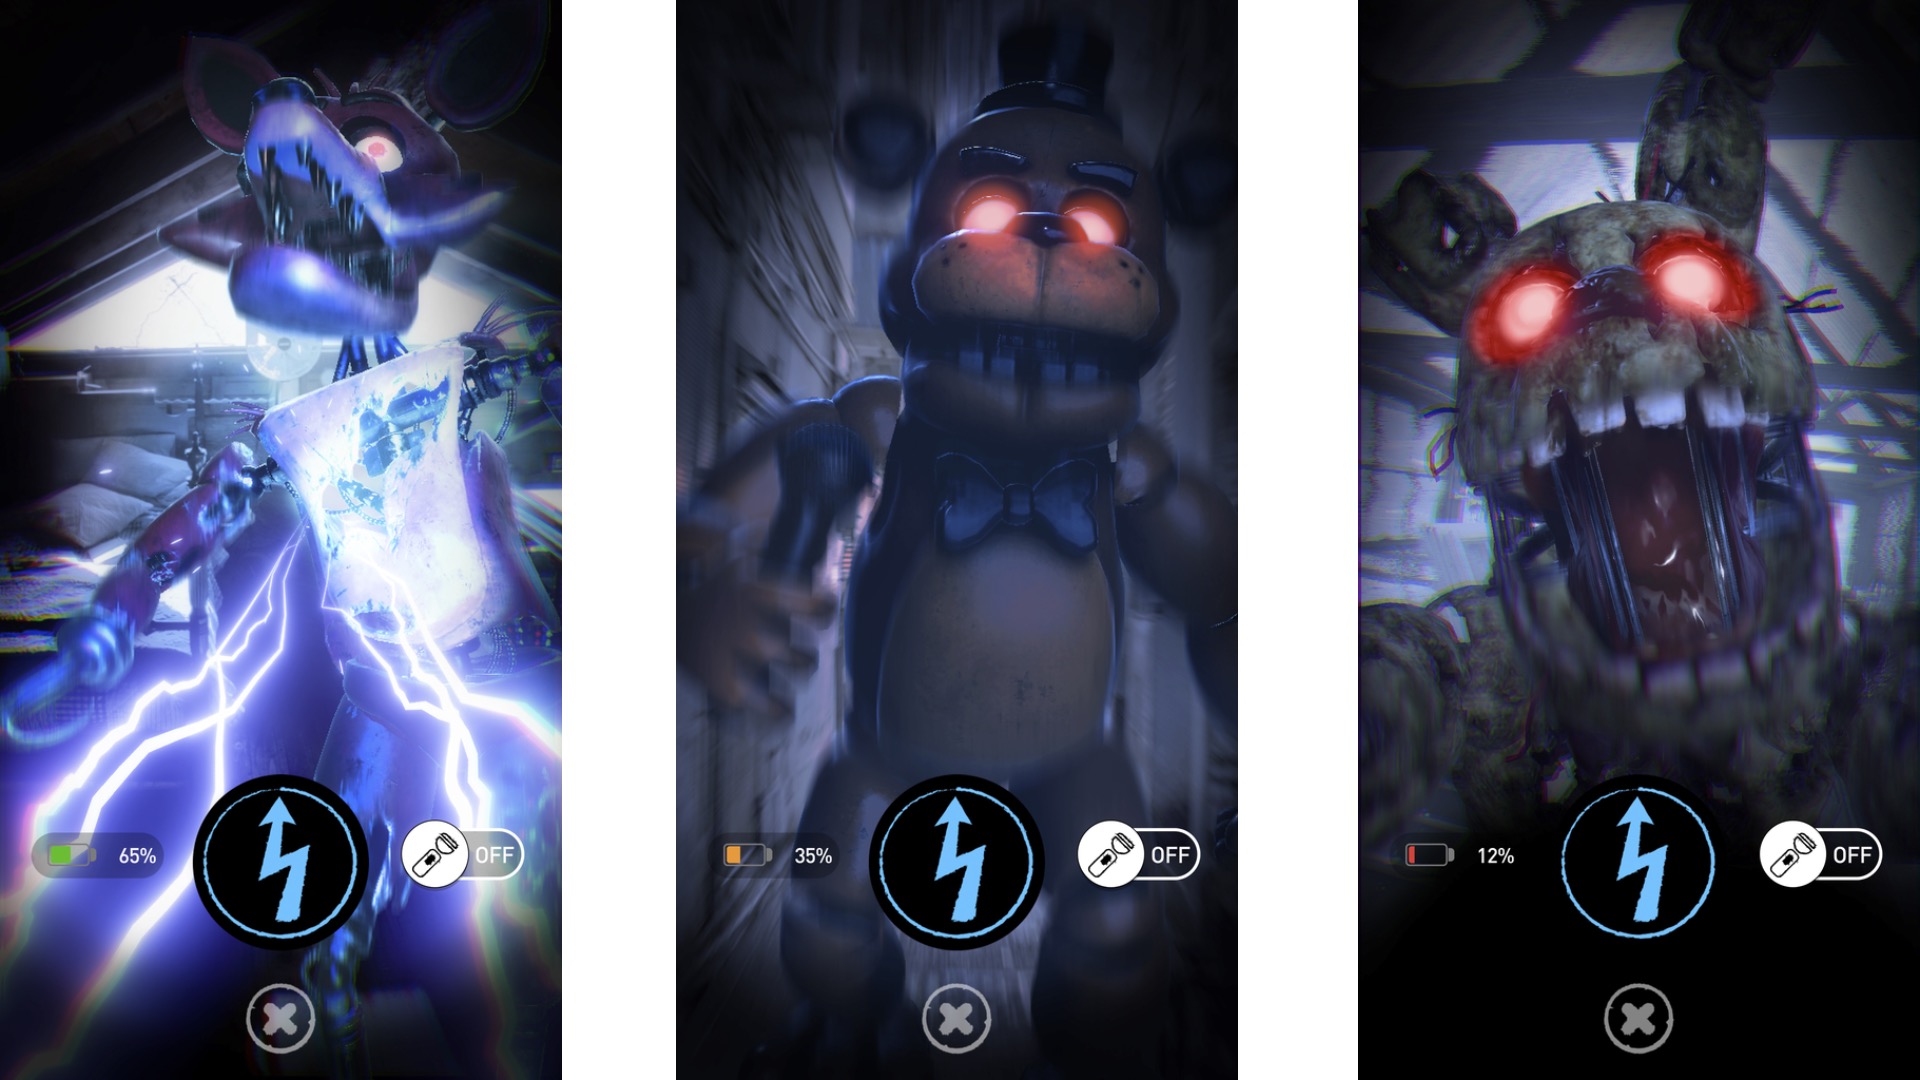 Five Nights at Freddy's AR: Special Delivery enters Early Access